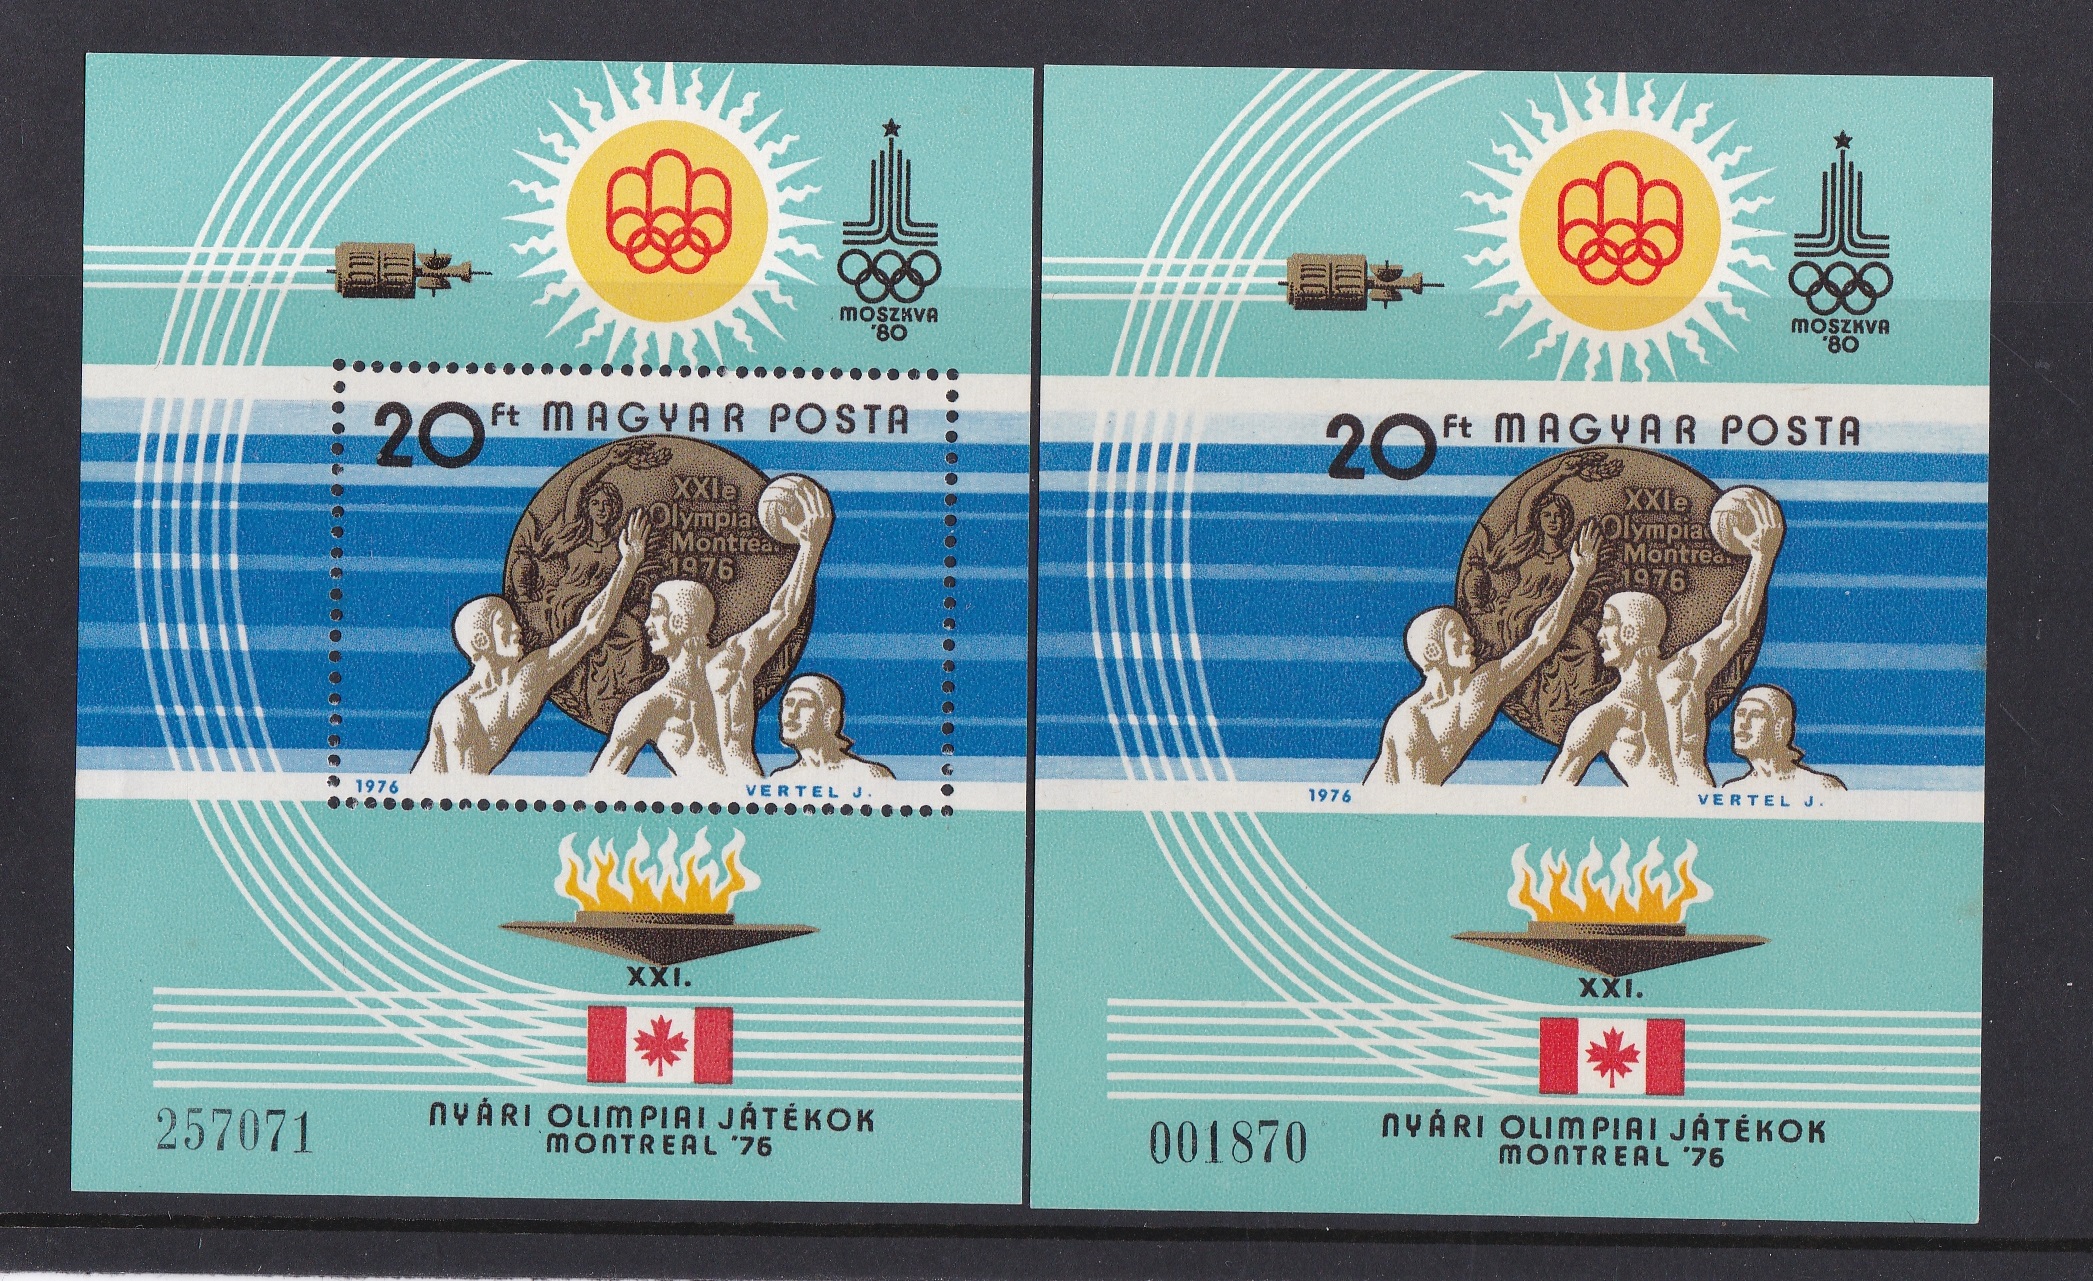 Hungary 1976 Olympic Games Montreal S.G. MS3048 u/m per and imperf miniature sheet, Michel 3169